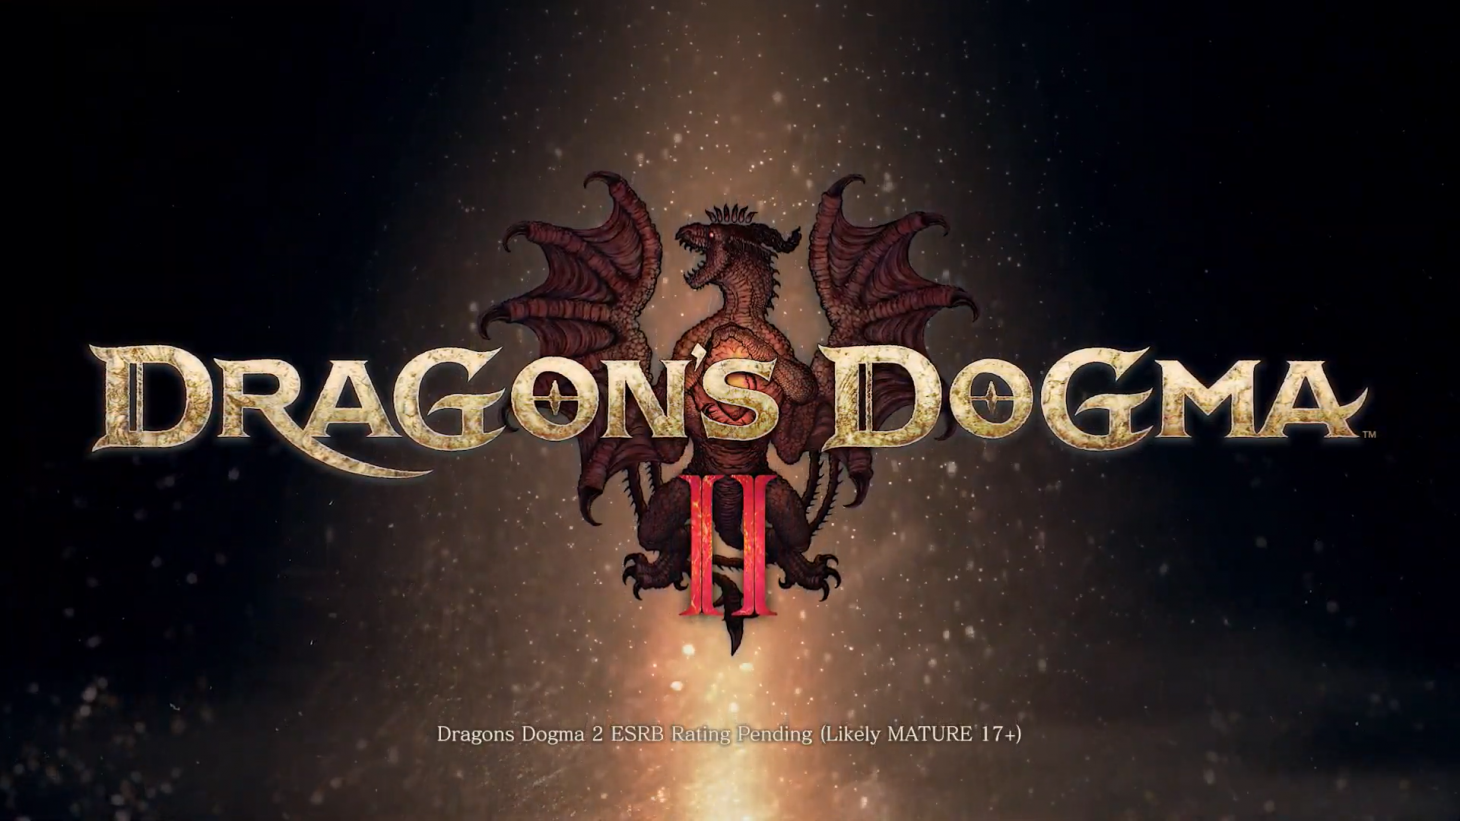 Dragon's dogma online Dungeons are awesome! in 2023